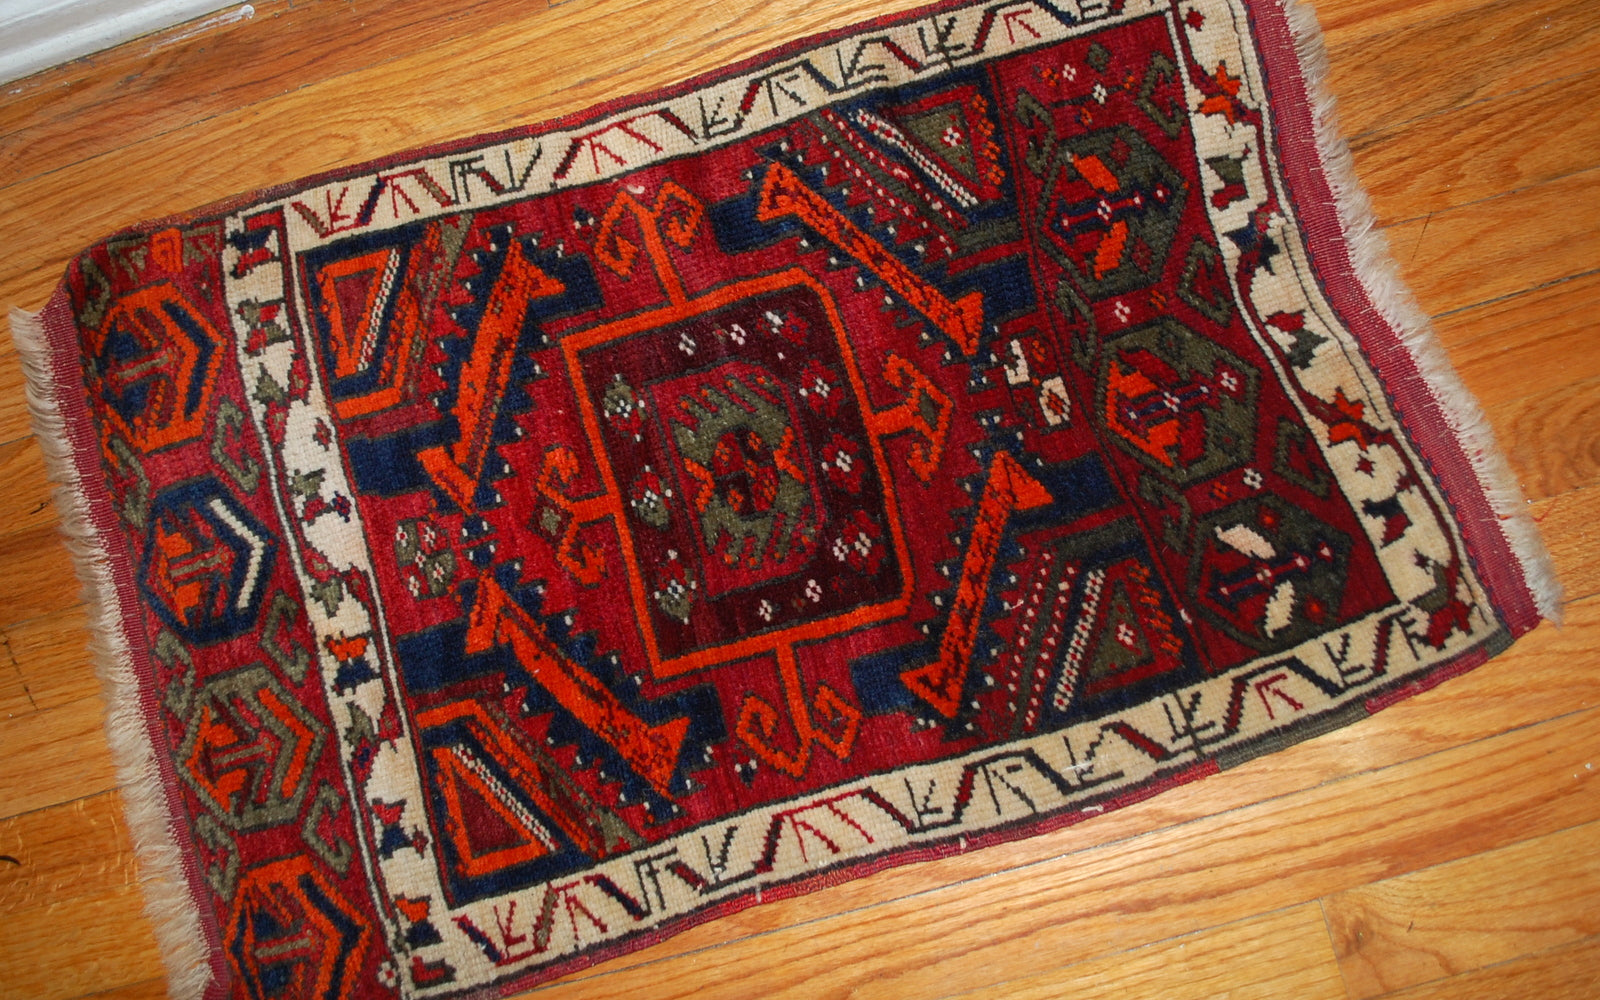 Antique collectible Turkish Yastik rug in original good condition, it is dated around 1890s. The rug made in combination of bright and dark colors. 